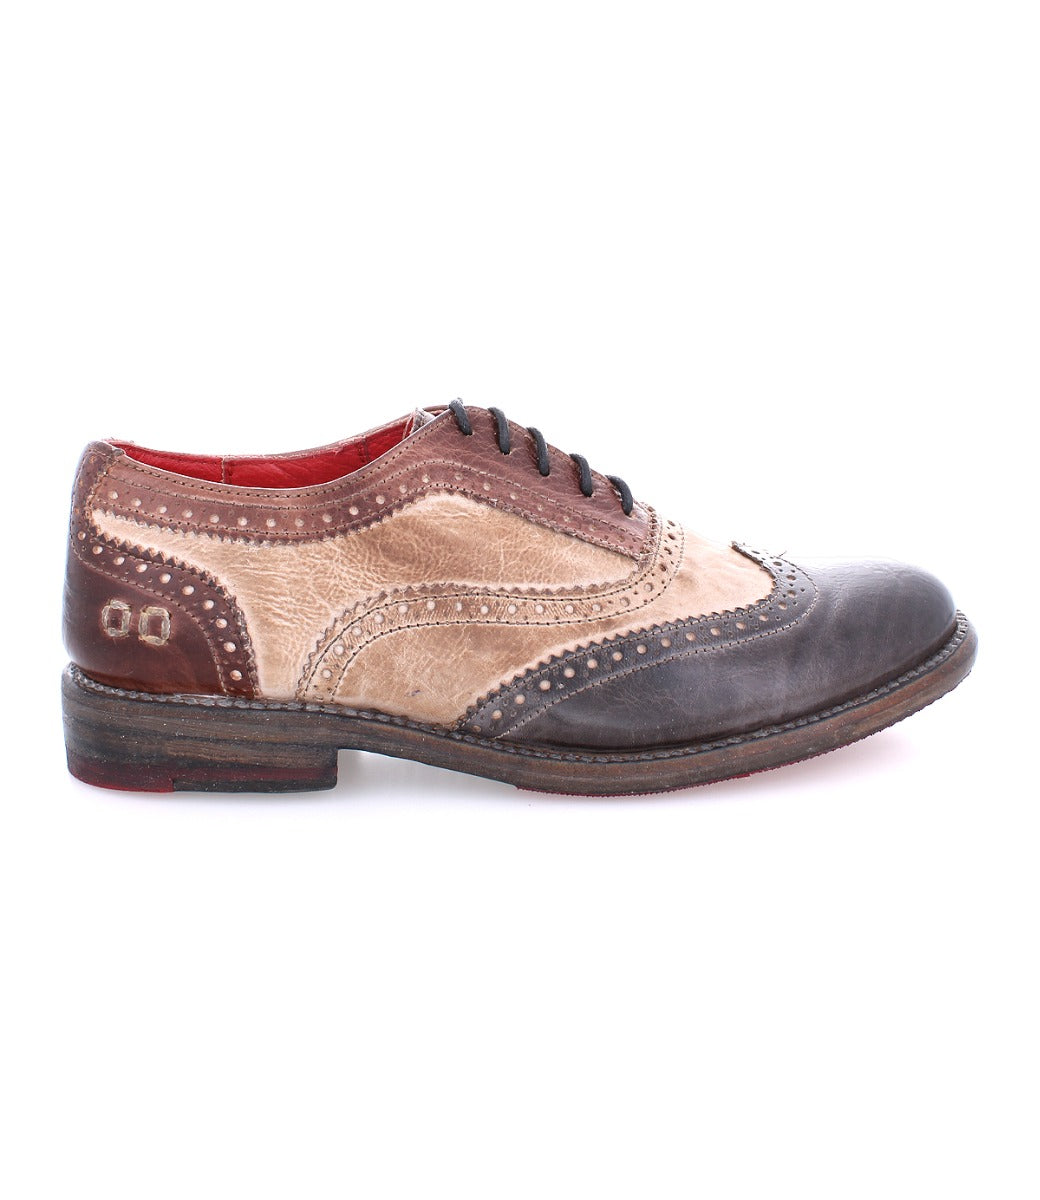 A woman's wingtip oxford shoe, the Lita by Bed Stu, with brown and black detailing.